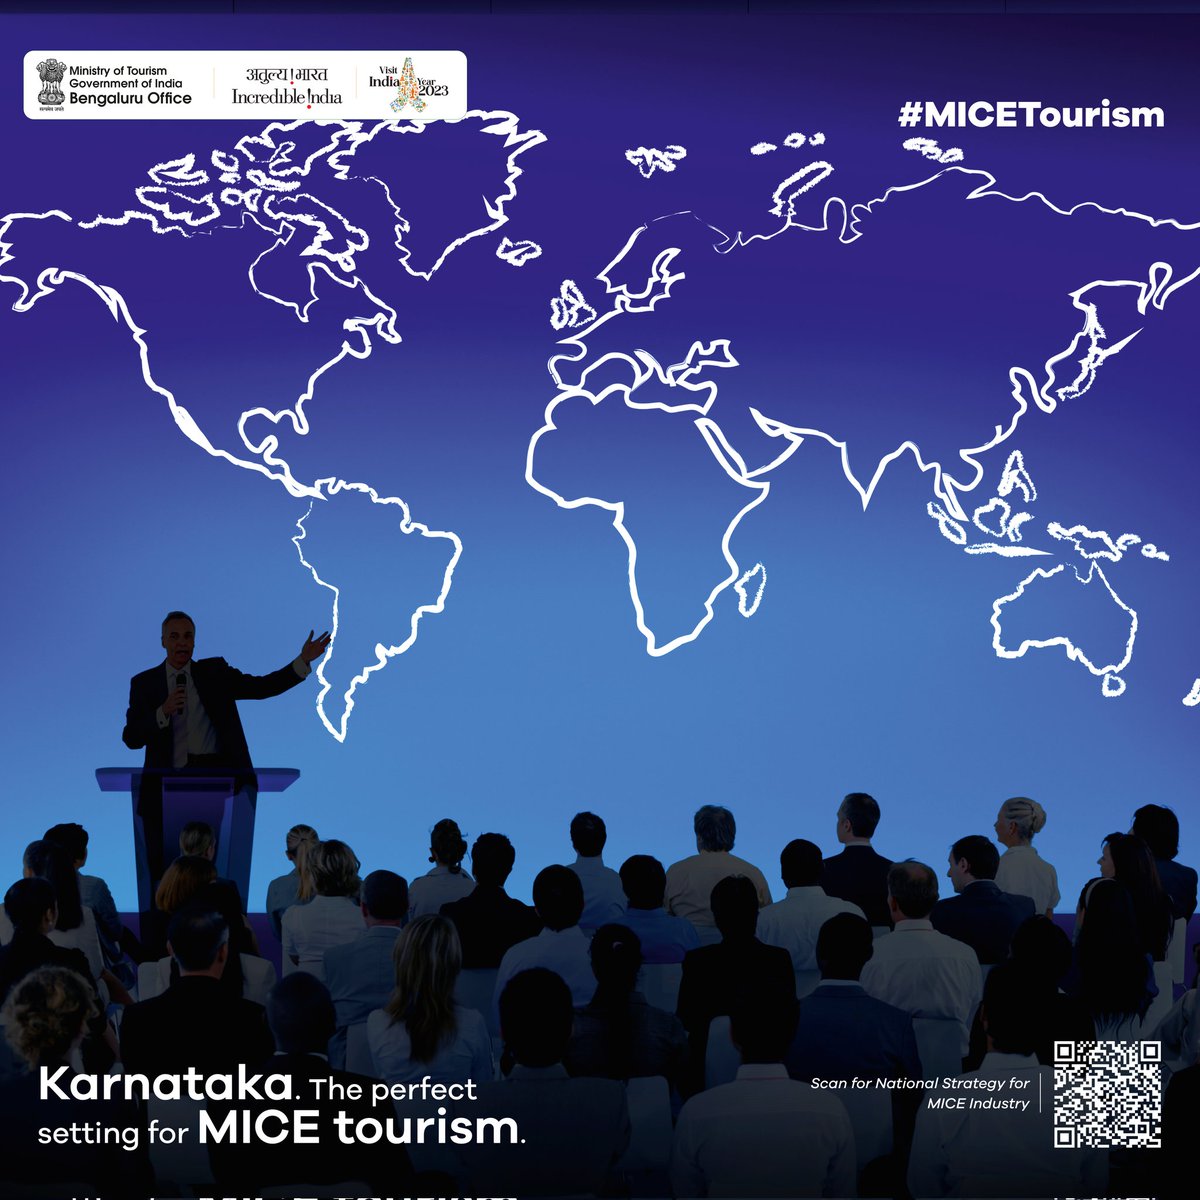 World-class facilities and excellent connectivity combined with a set of trained and skilled service providers, make Karnataka an ideal destination for #MICETourism

@KarnatakaWorld @India_MICE 

#Karnataka #Tourism #Travel 
#IncredibleIndia #India